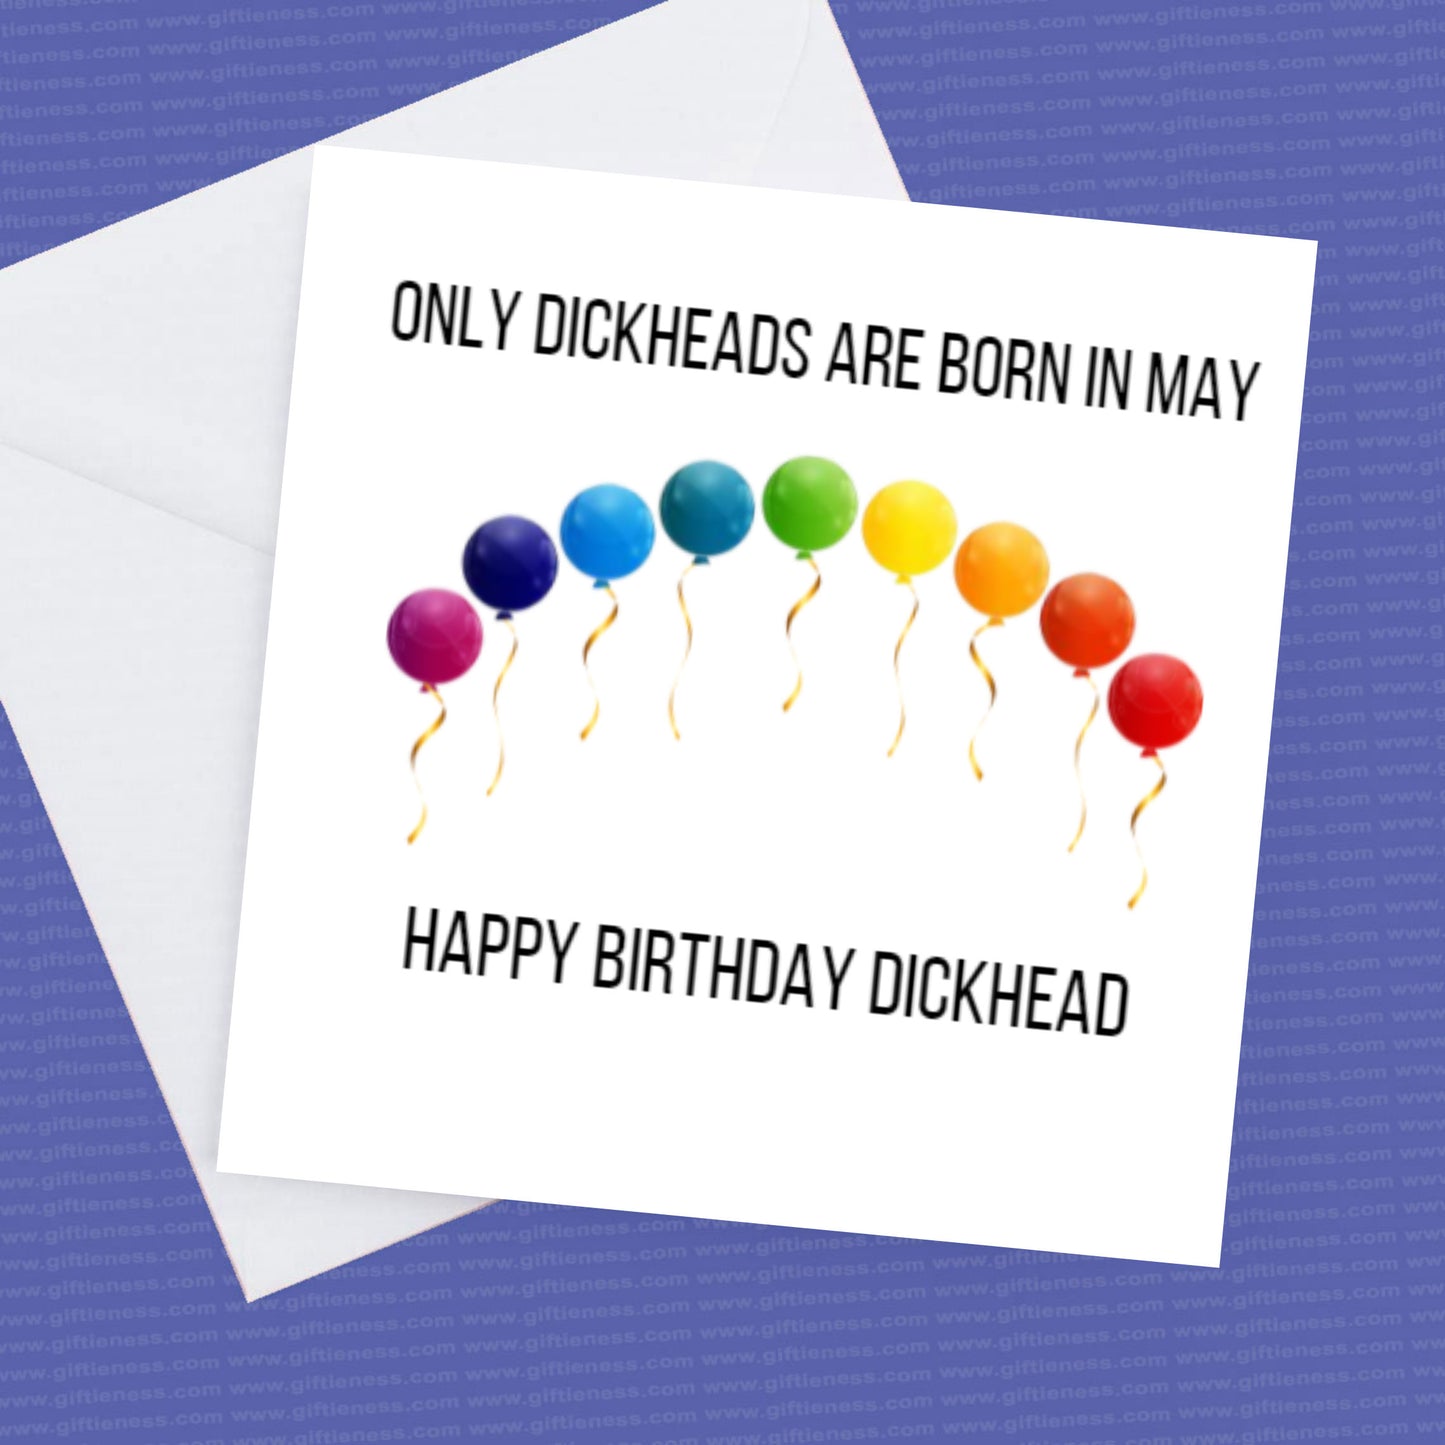 Only Dickheads are born in May - Happy Birthday Dickhead - Month can be changed to any you require